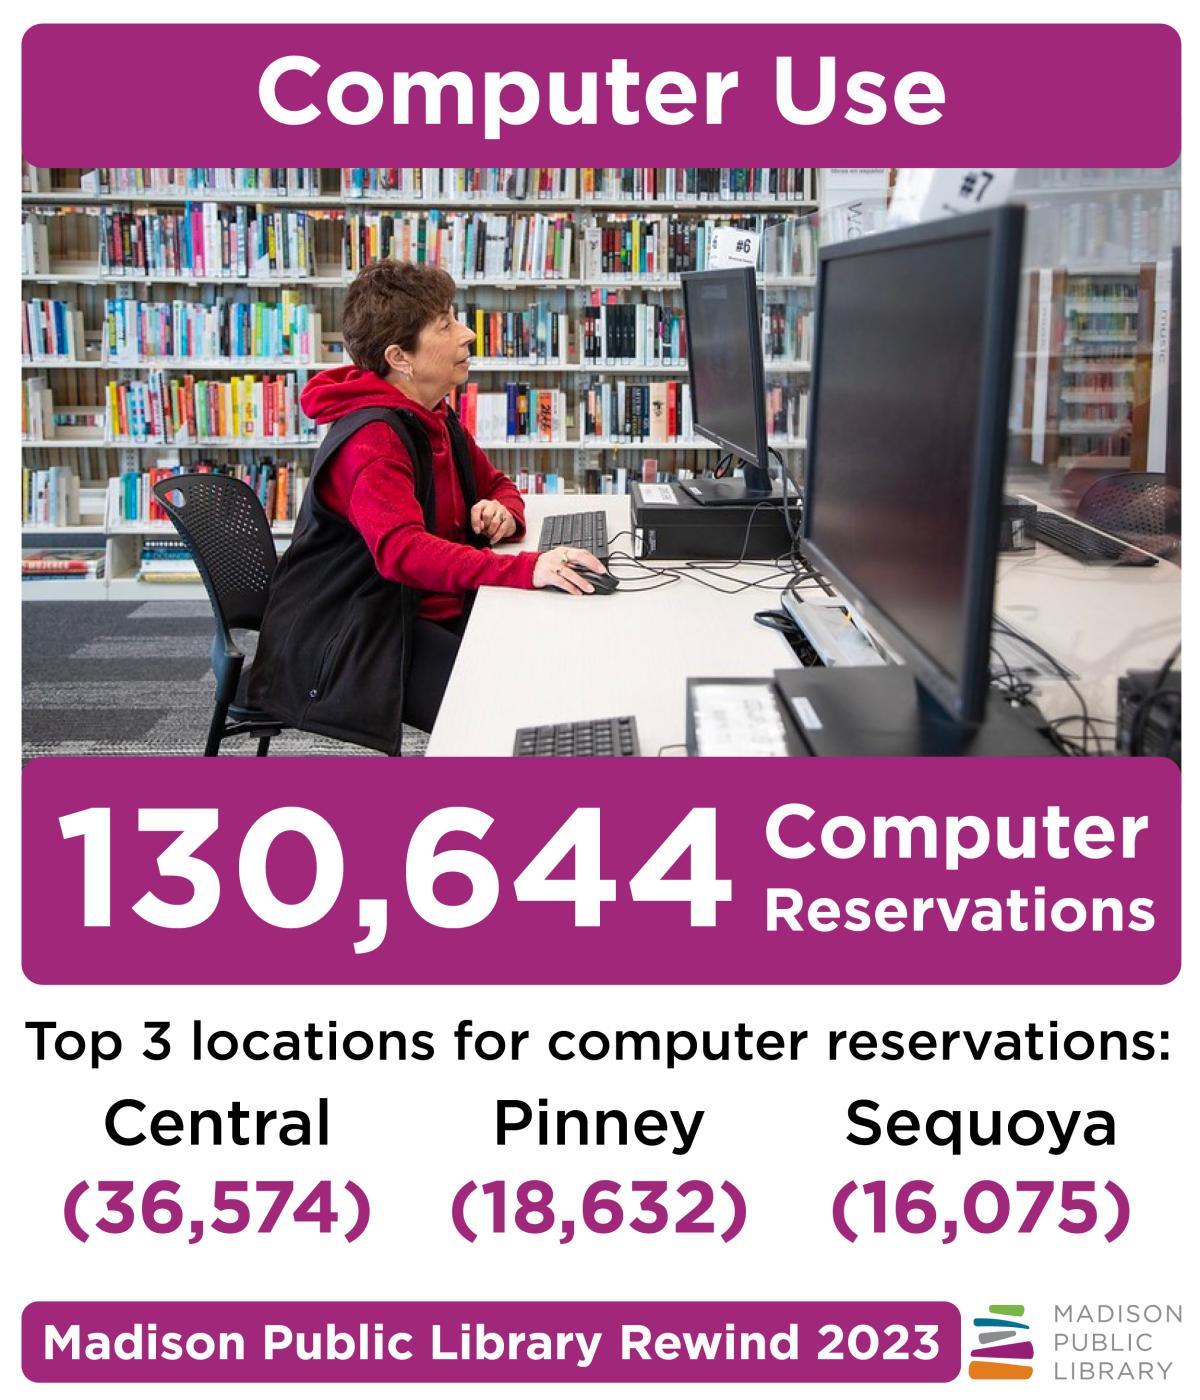 Madison Public Library Year in Review 2023 Computer Use numbers